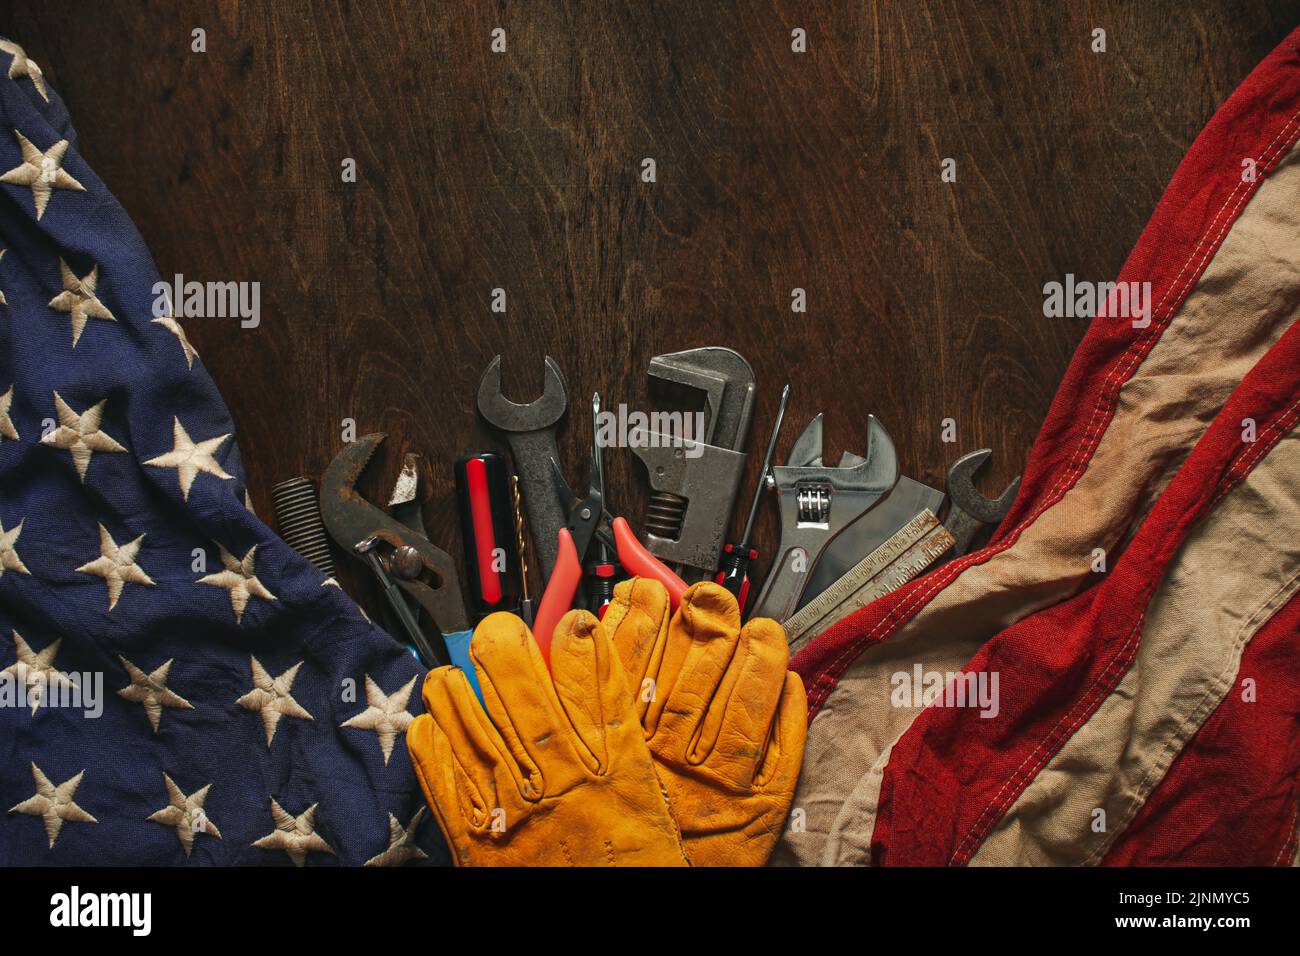 Worn work gloves on tools with US American flag. Made in USA, American workforce, blue collar worker, or Labor Day concept. Stock Photo